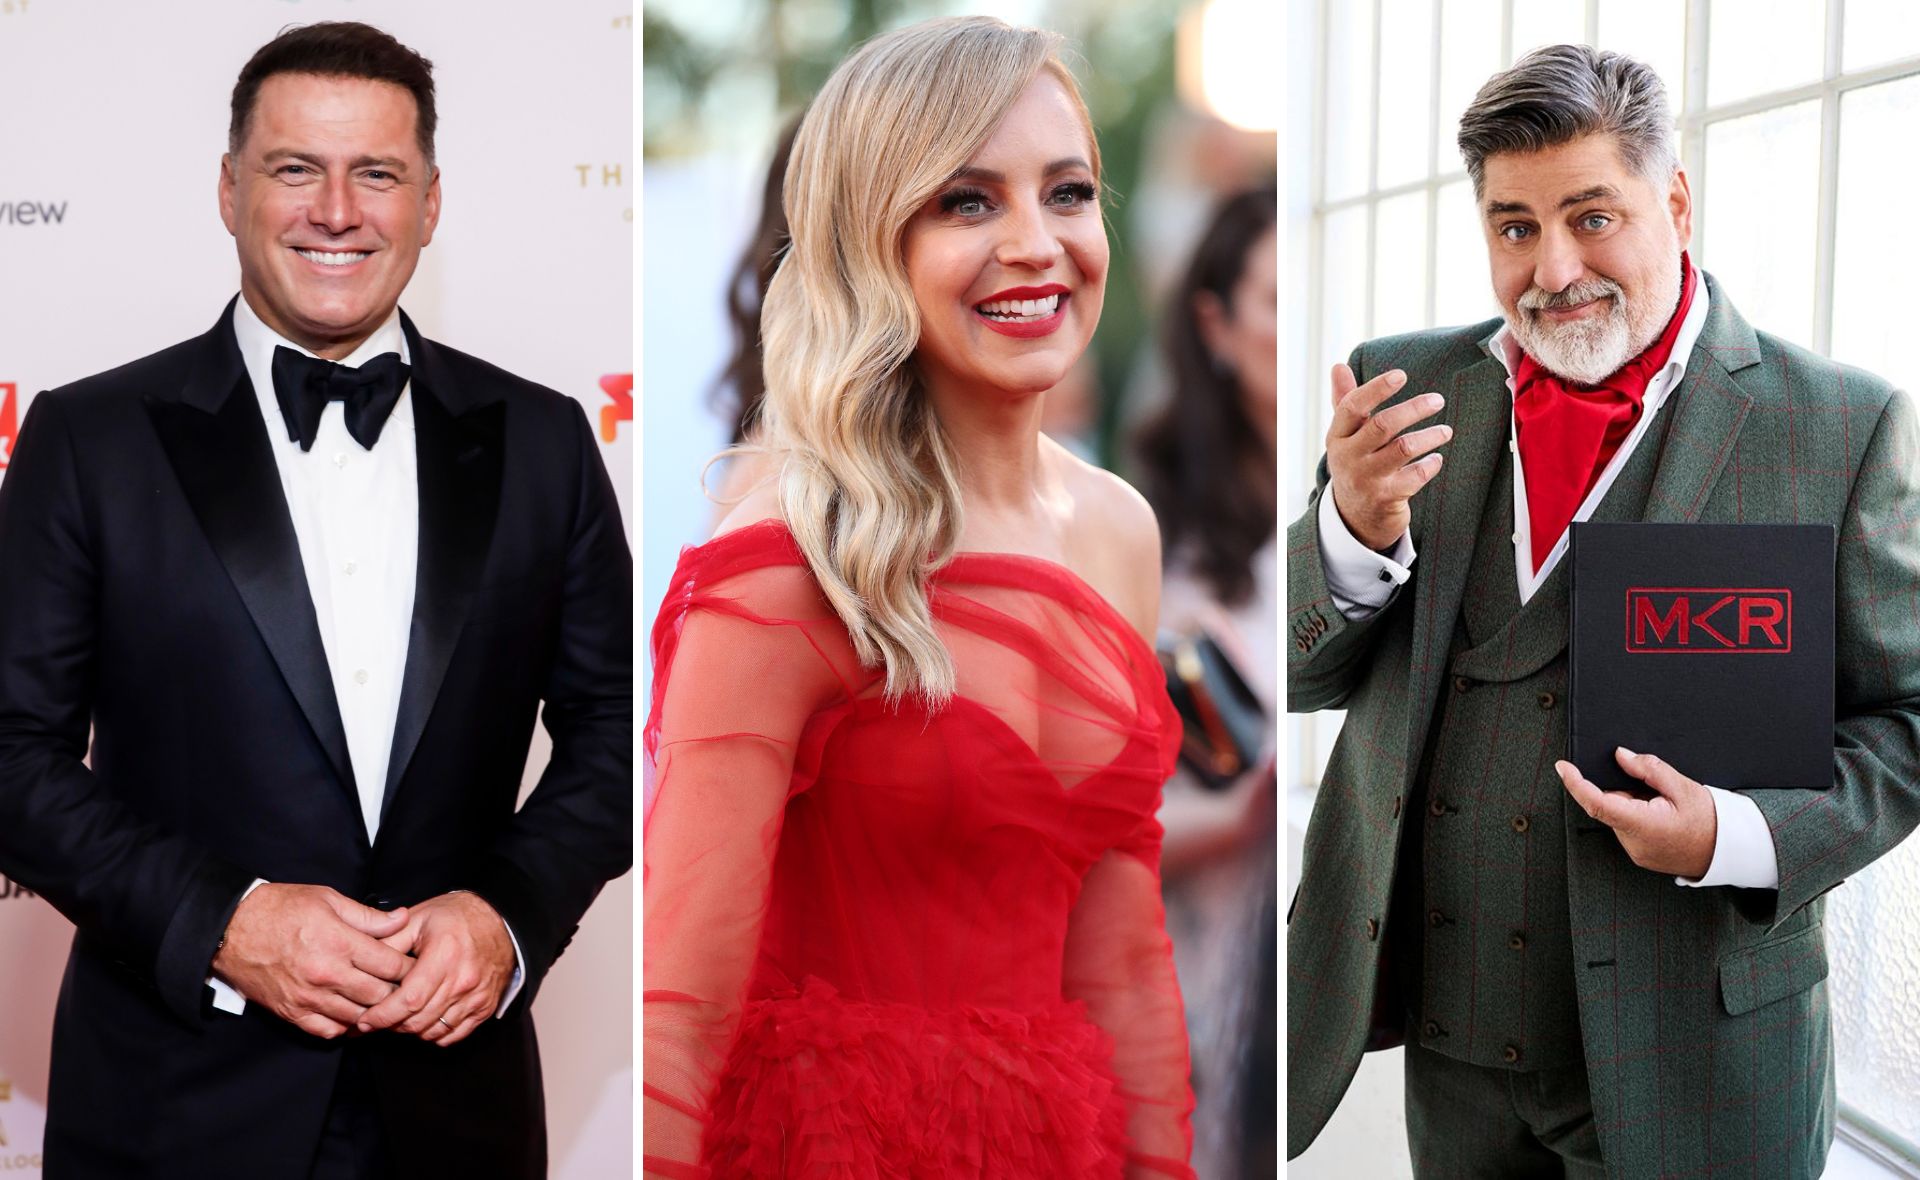 These Aussie television stars aren’t afraid to ruffle some feathers